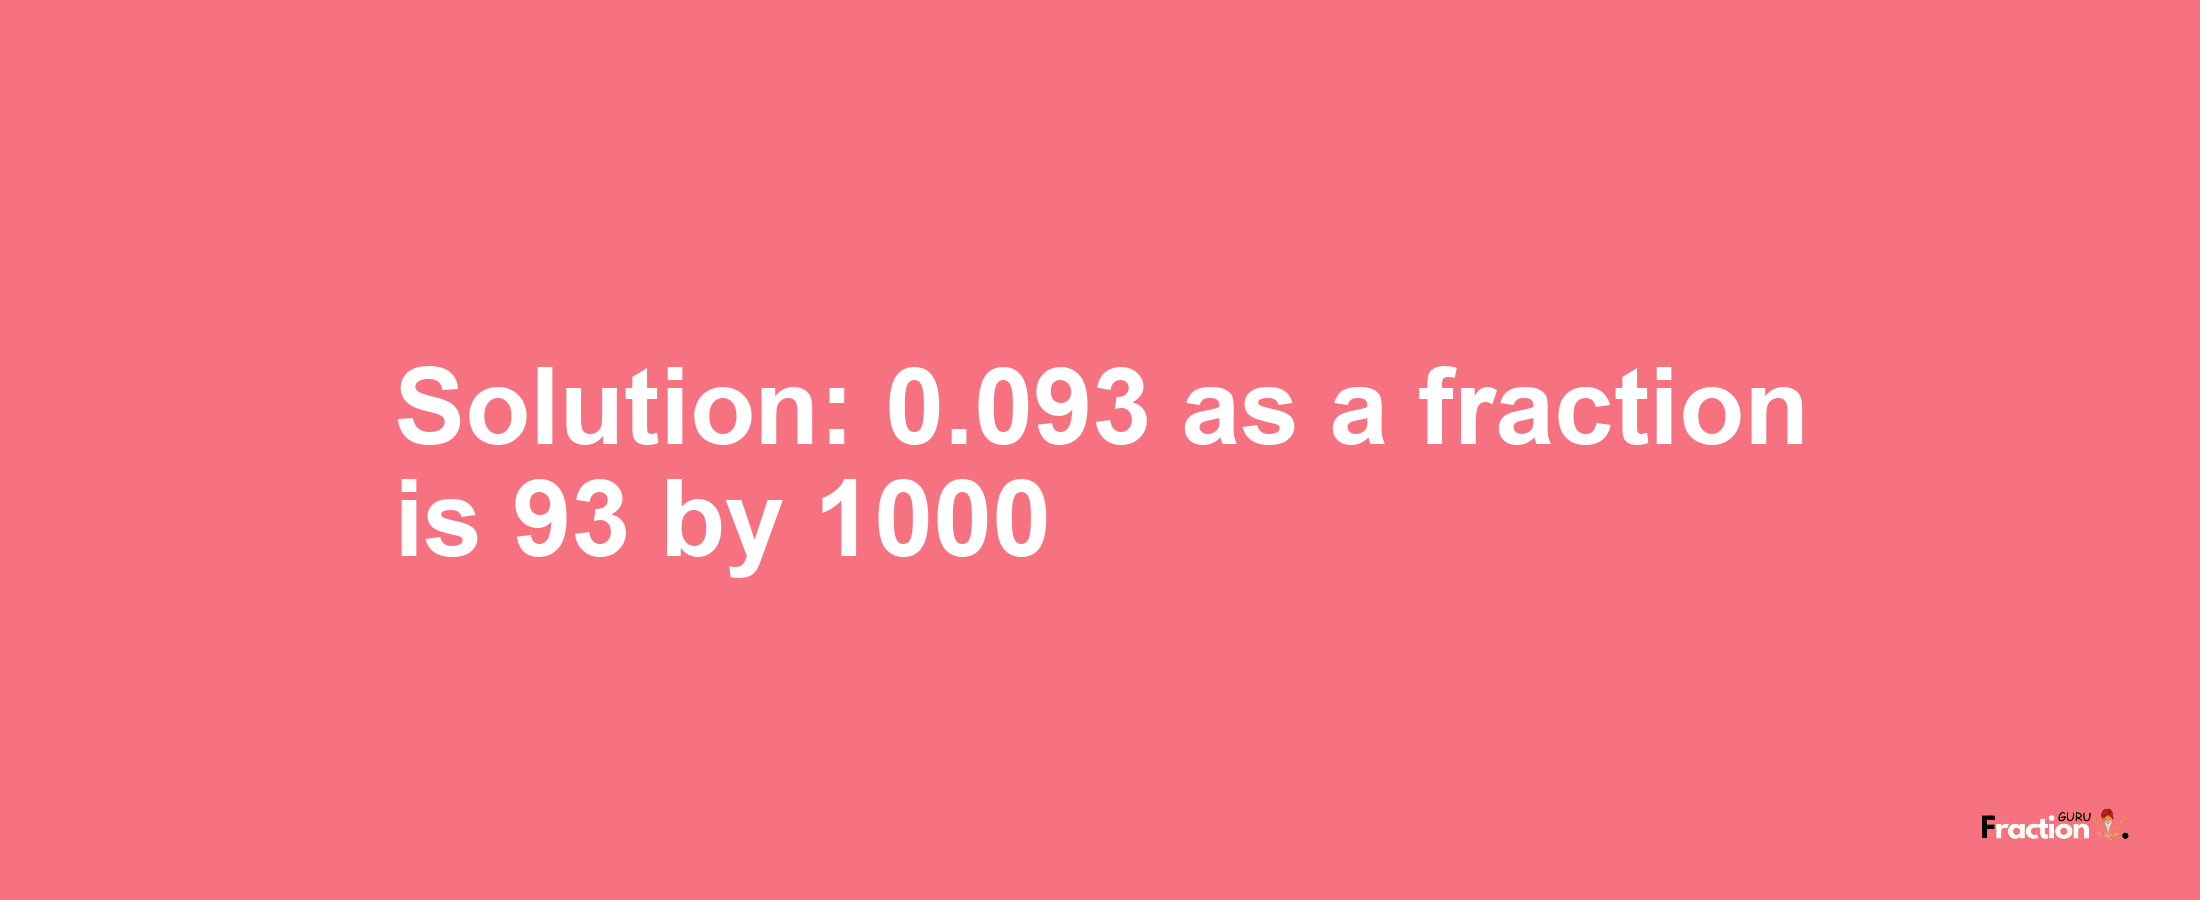 Solution:0.093 as a fraction is 93/1000